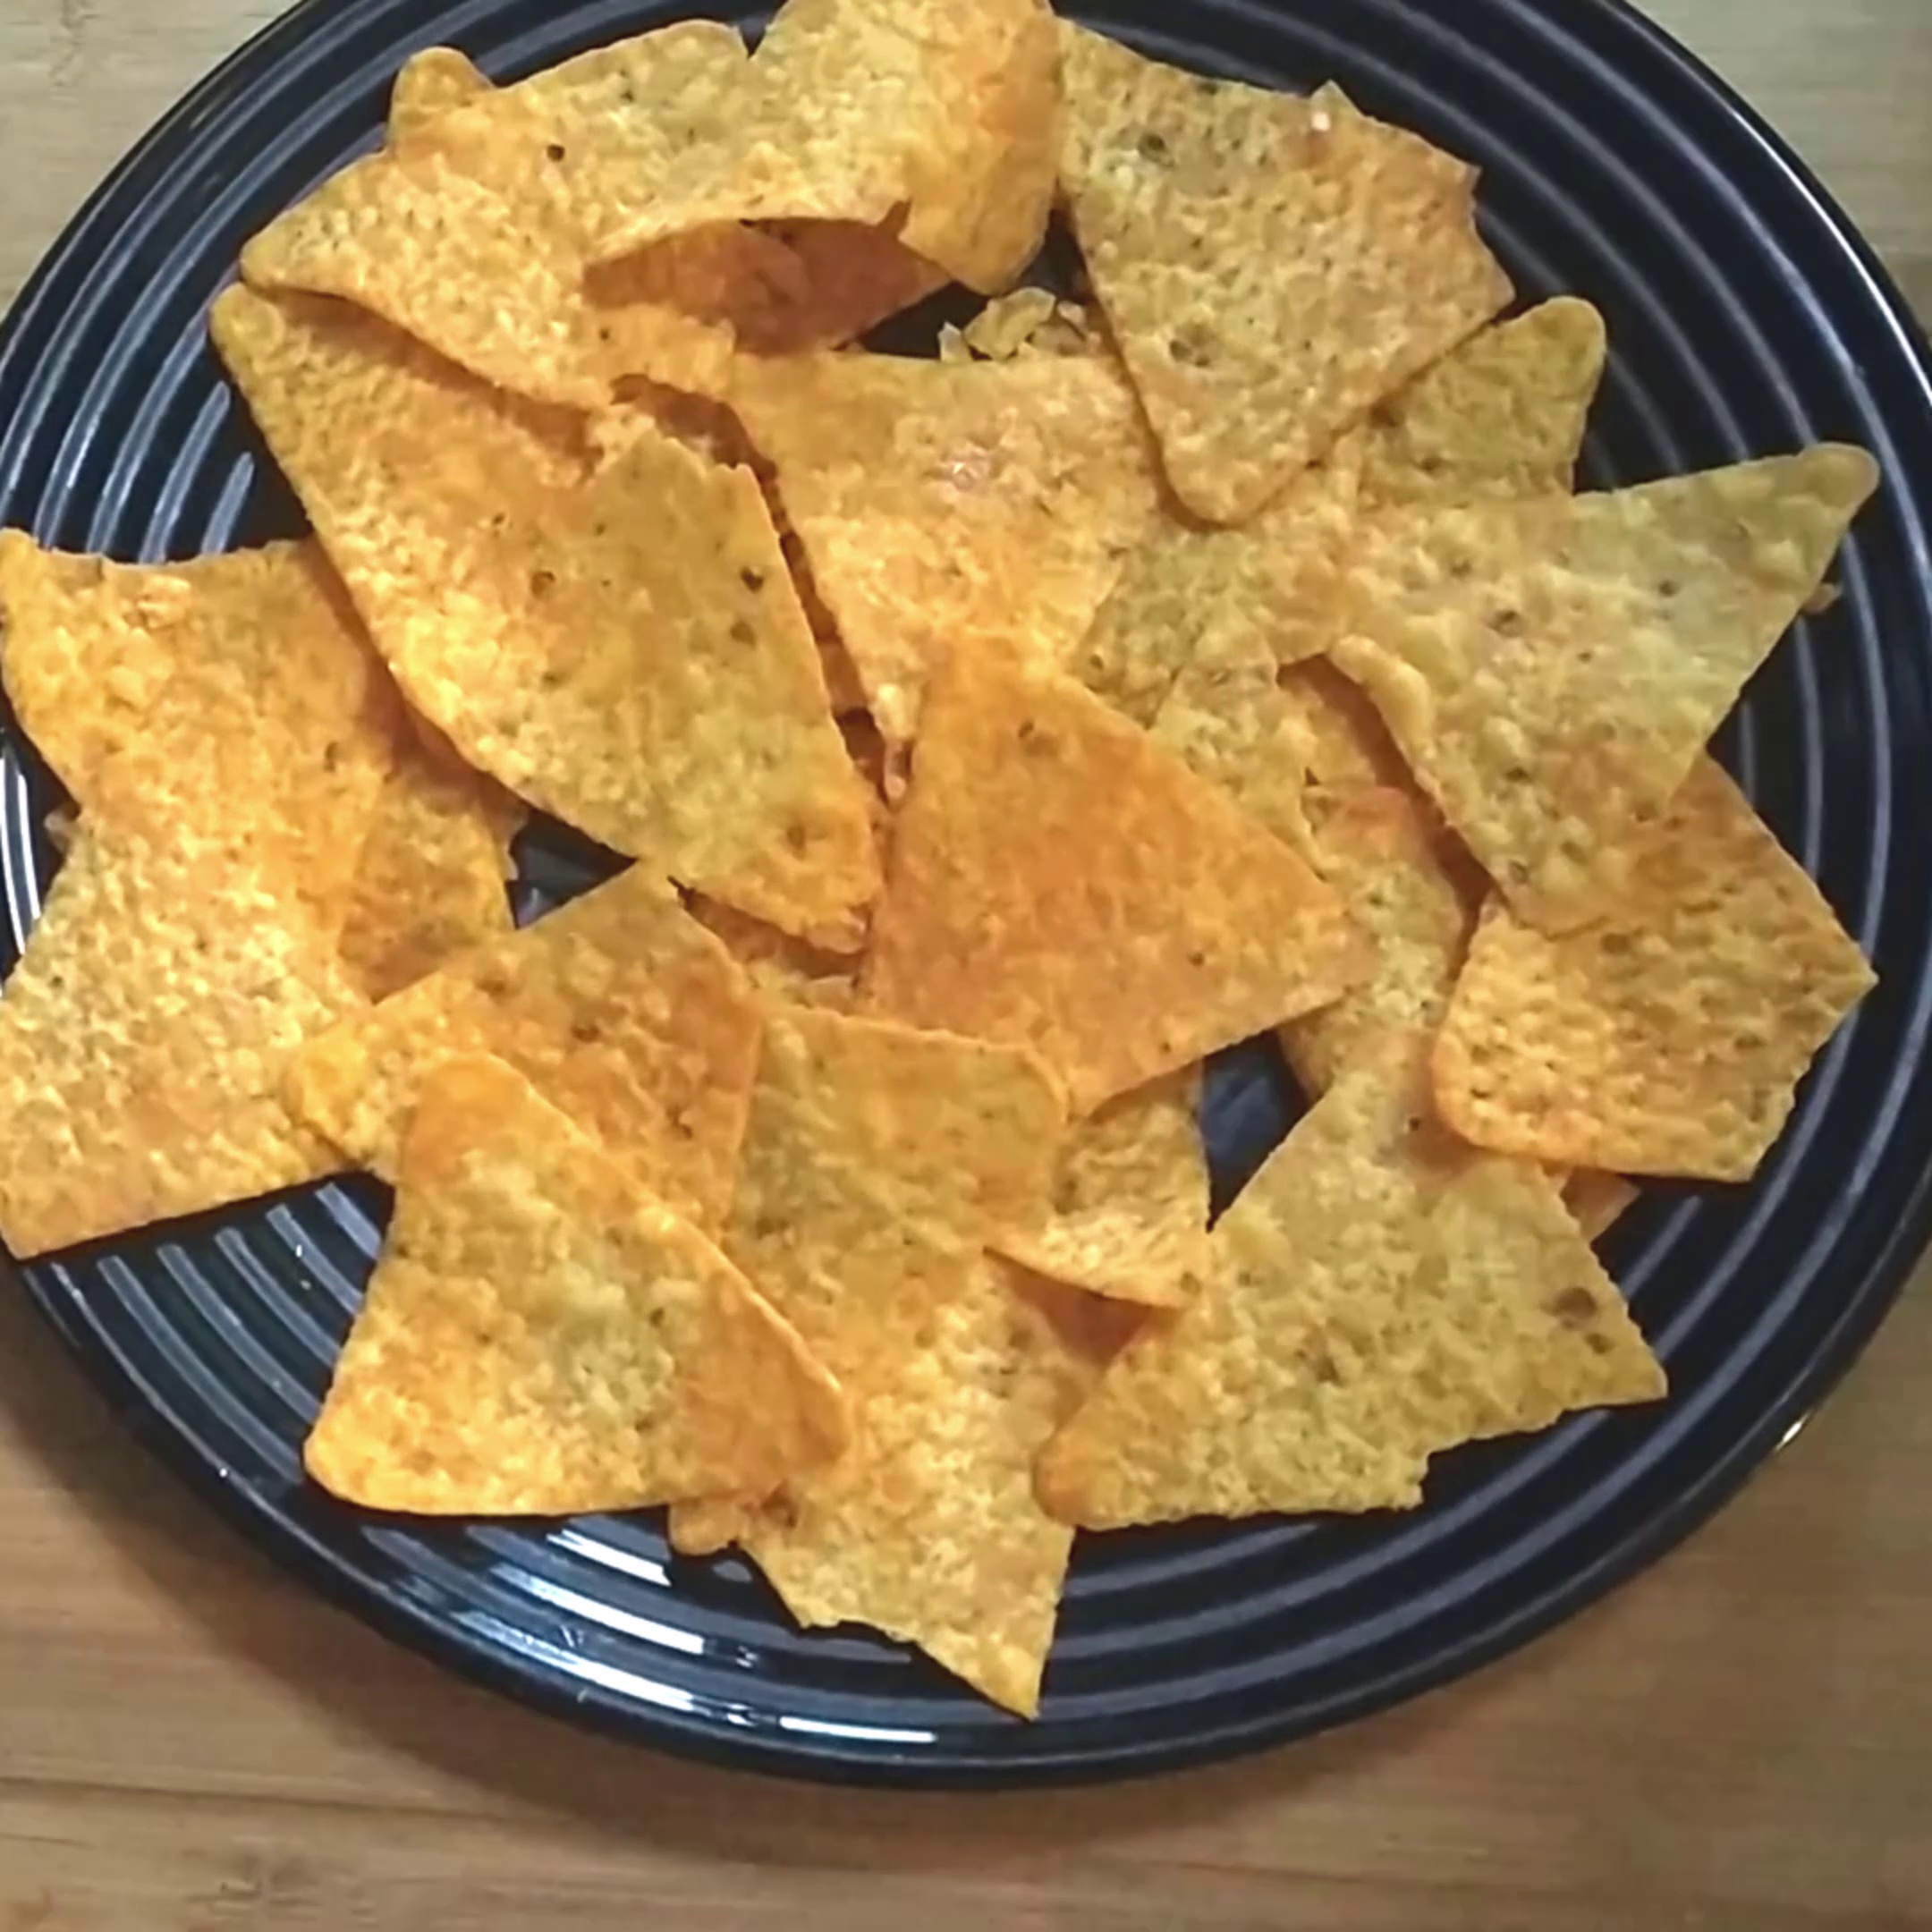 Step 1 - Take nachos or doritos in a plate and spread in a thin layer.